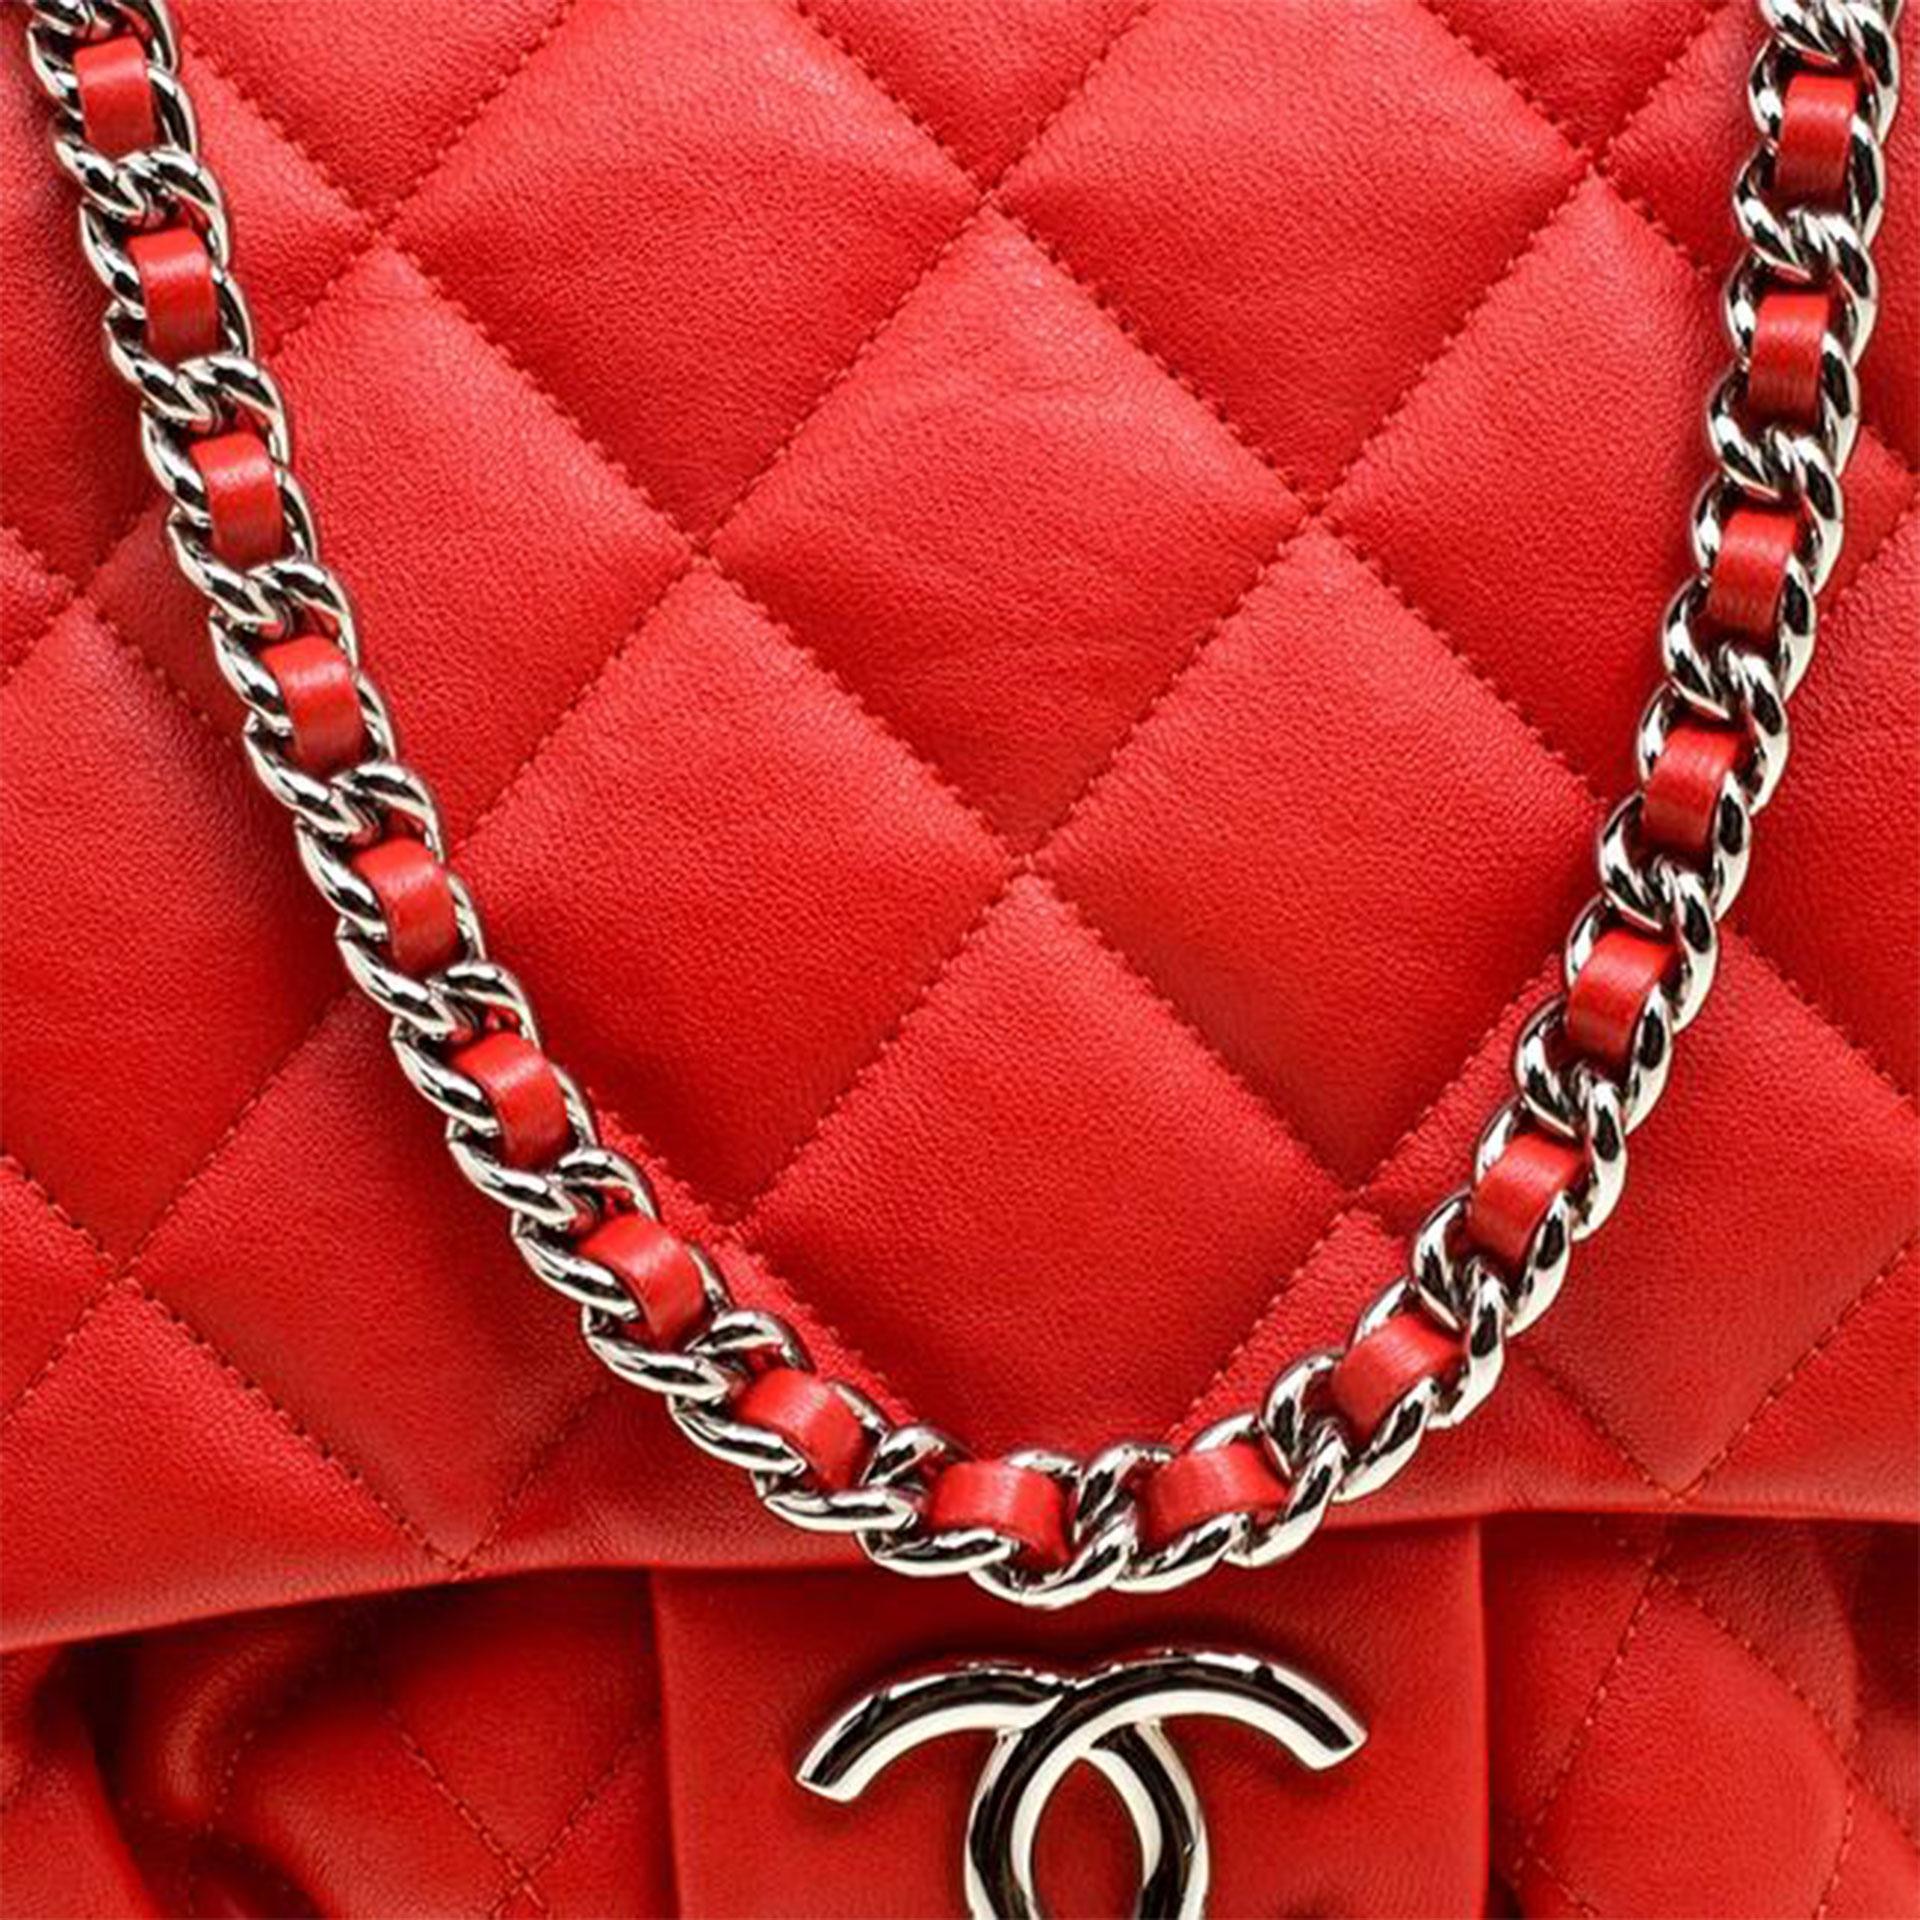 Chanel Large Chain Around Limited Edition Pristine Red Calfskin Leather Flap Bag For Sale 4